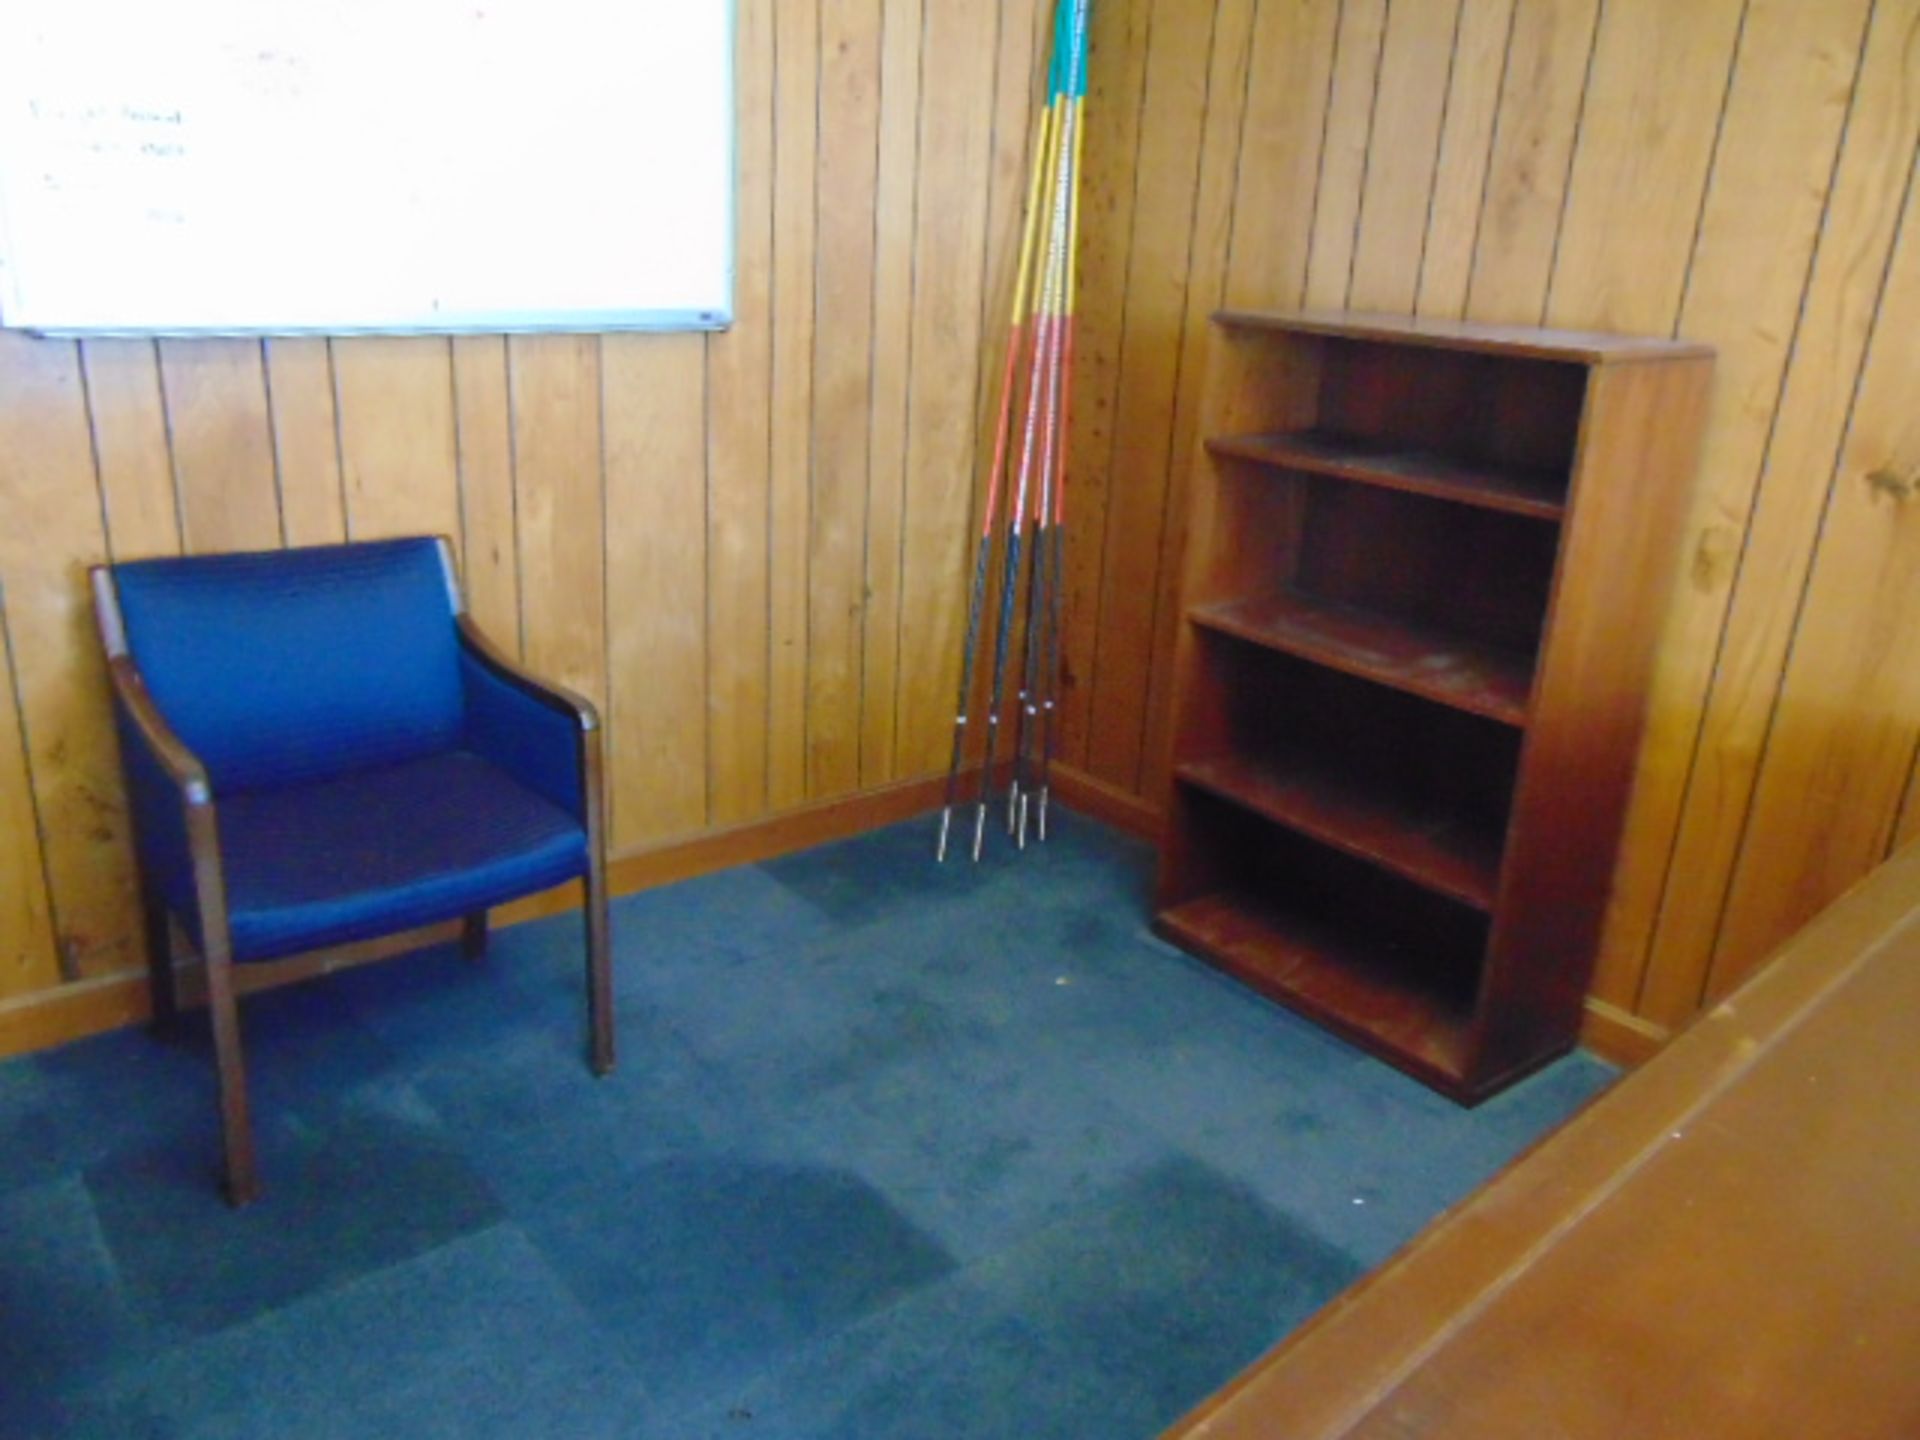 LOT CONSISTING OF: (2) desks, credenza, bookcase & (3) chairs (located upstairs) - Image 3 of 3